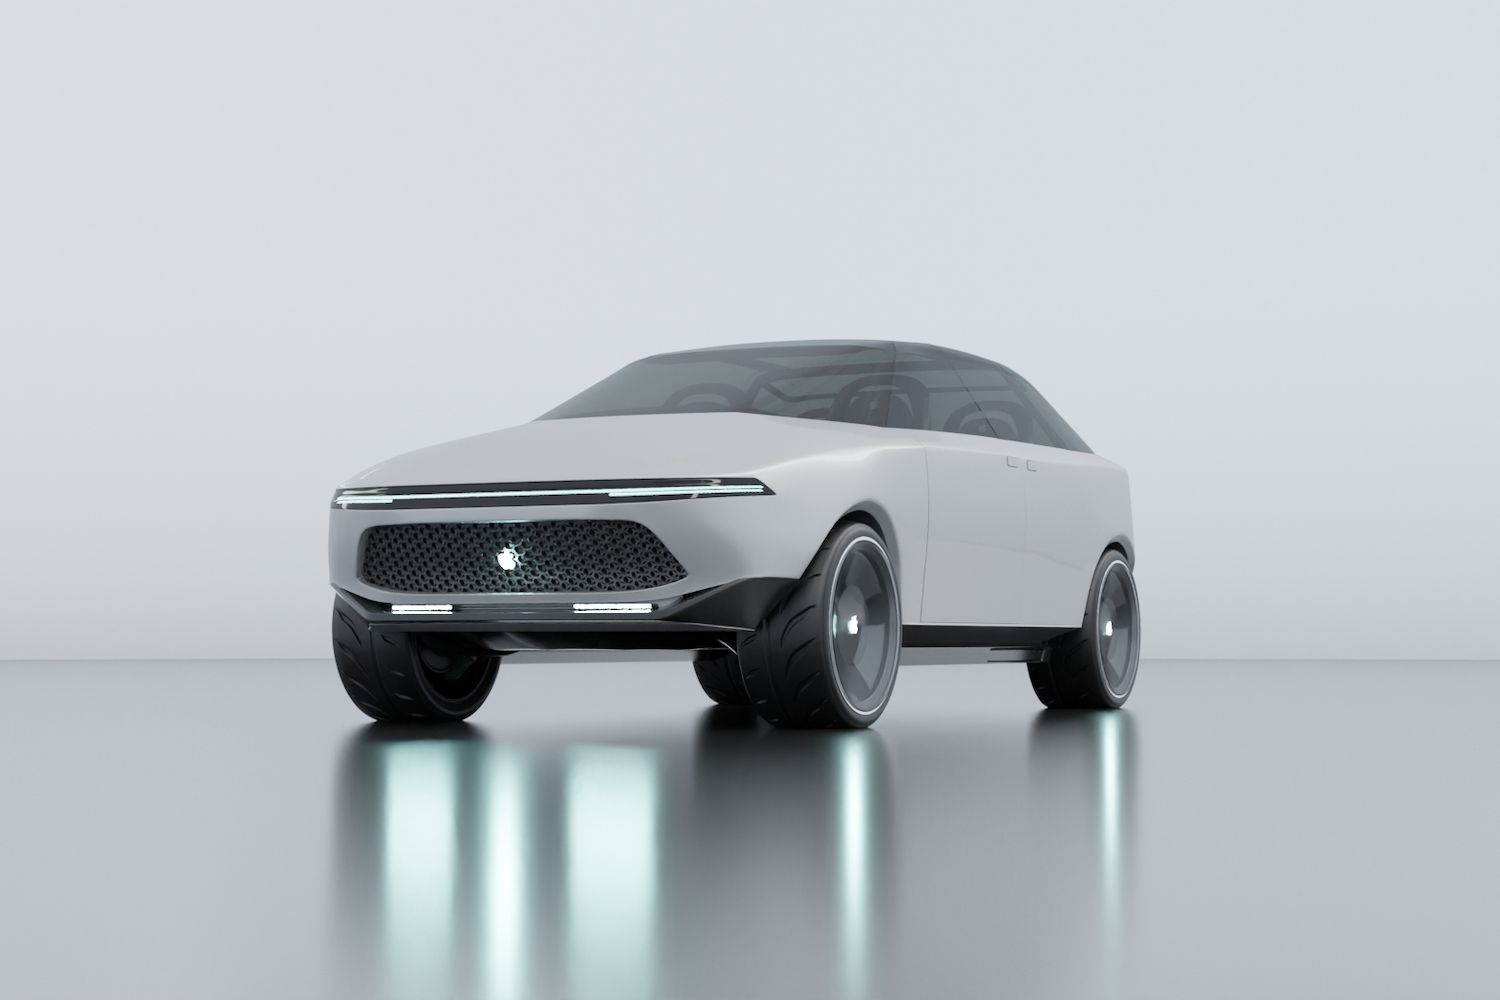 What The Apple Car Design Will Look Like, According To A Patent Spy